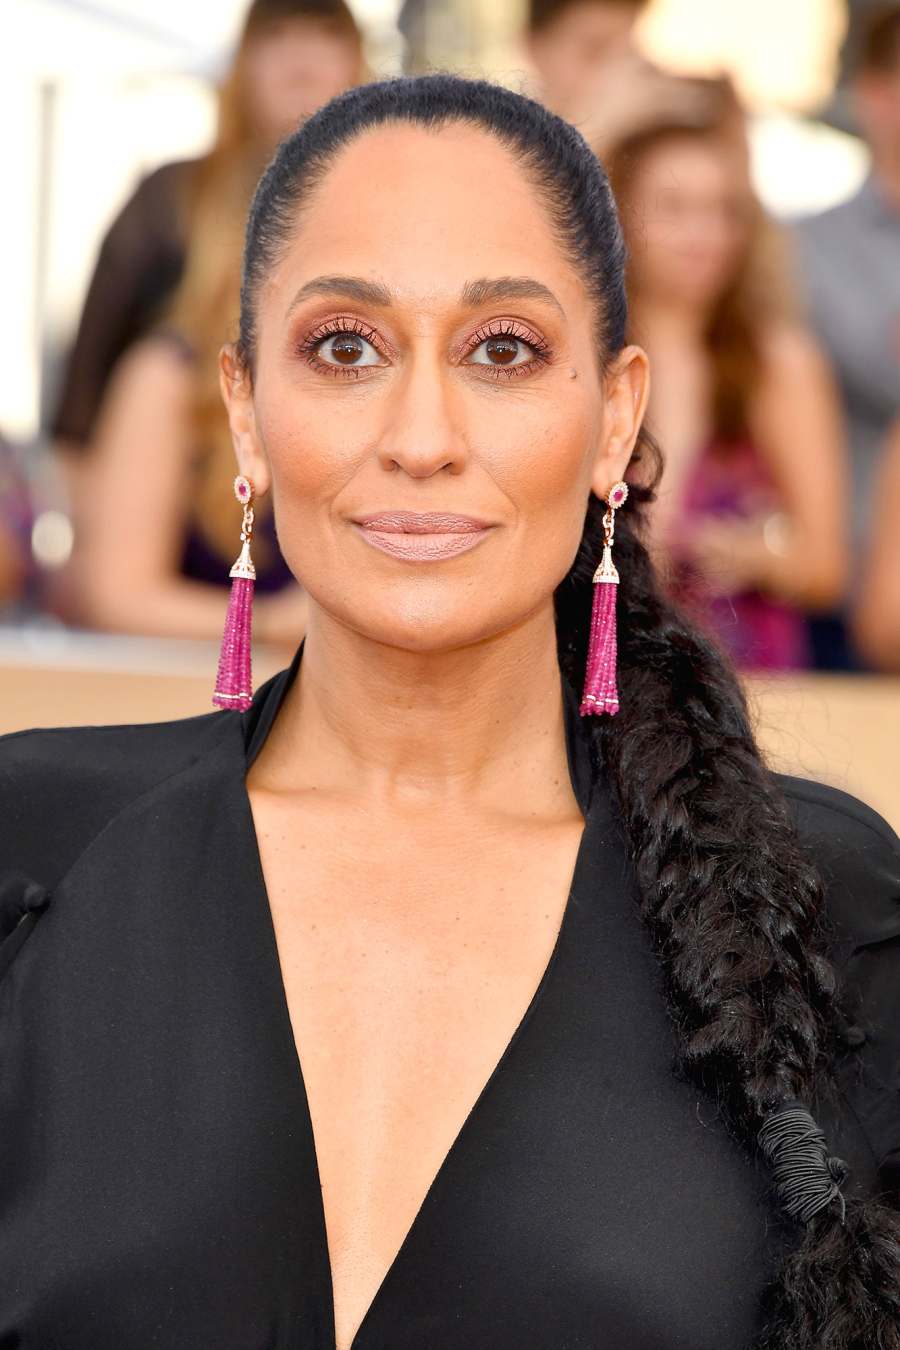 Tracee Ellis Ross Beauty Of The Day